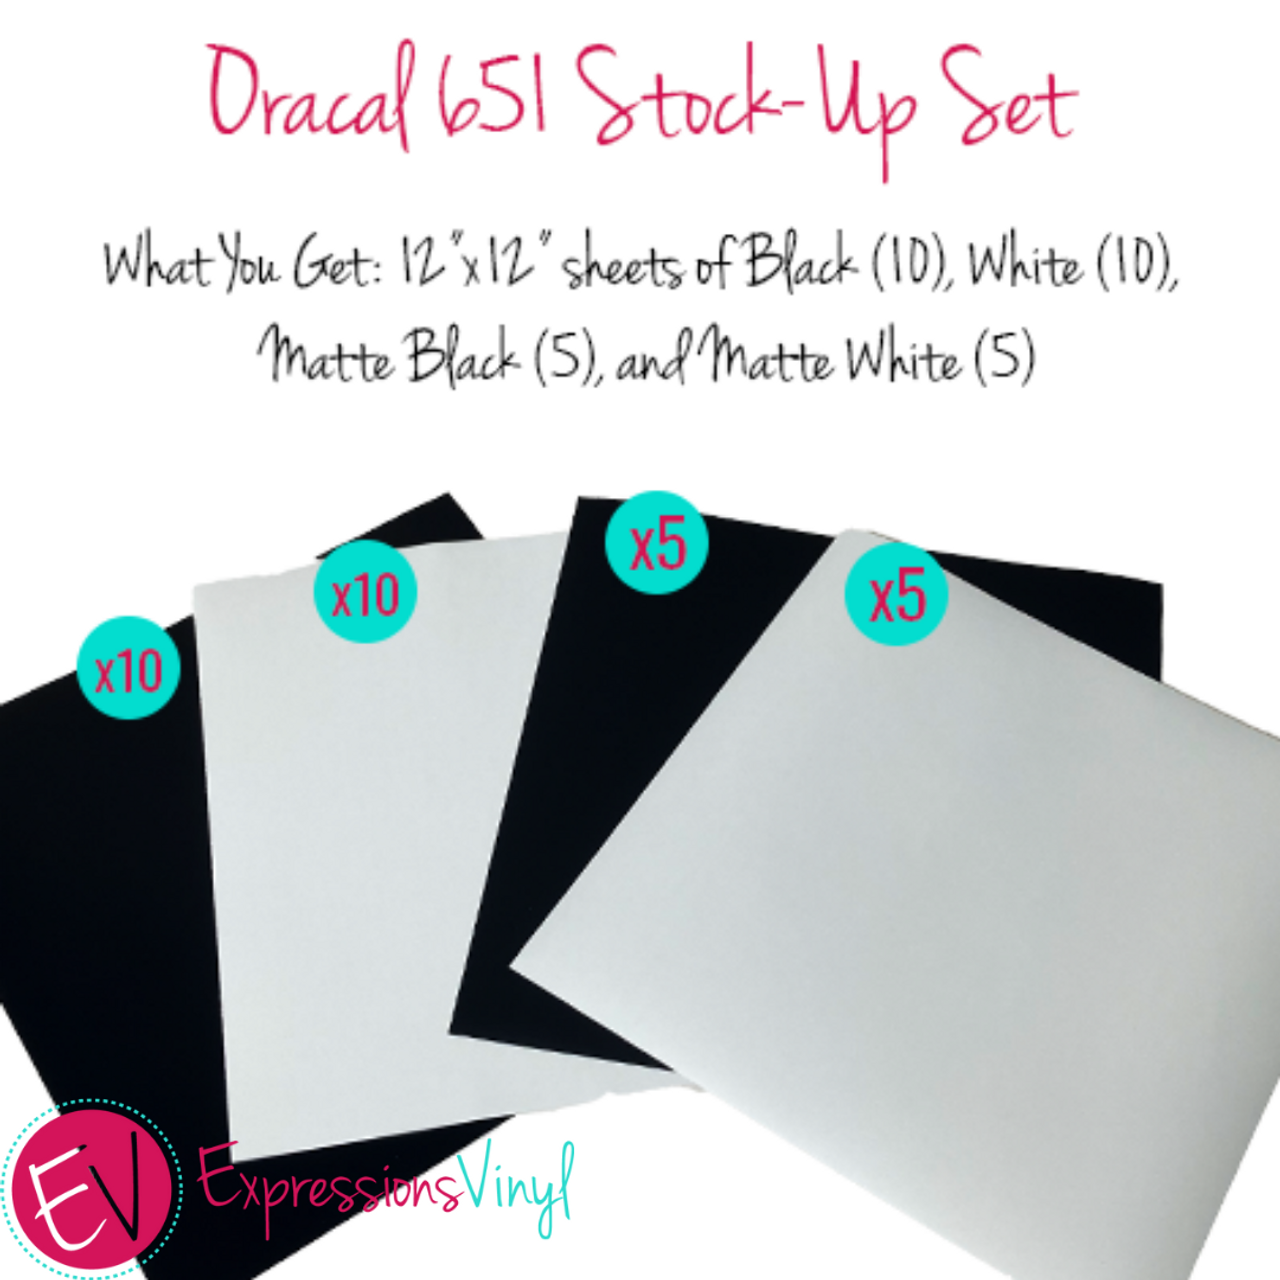 Oracal 651 Stock Up Set (Includes 30 12 Sheets!)